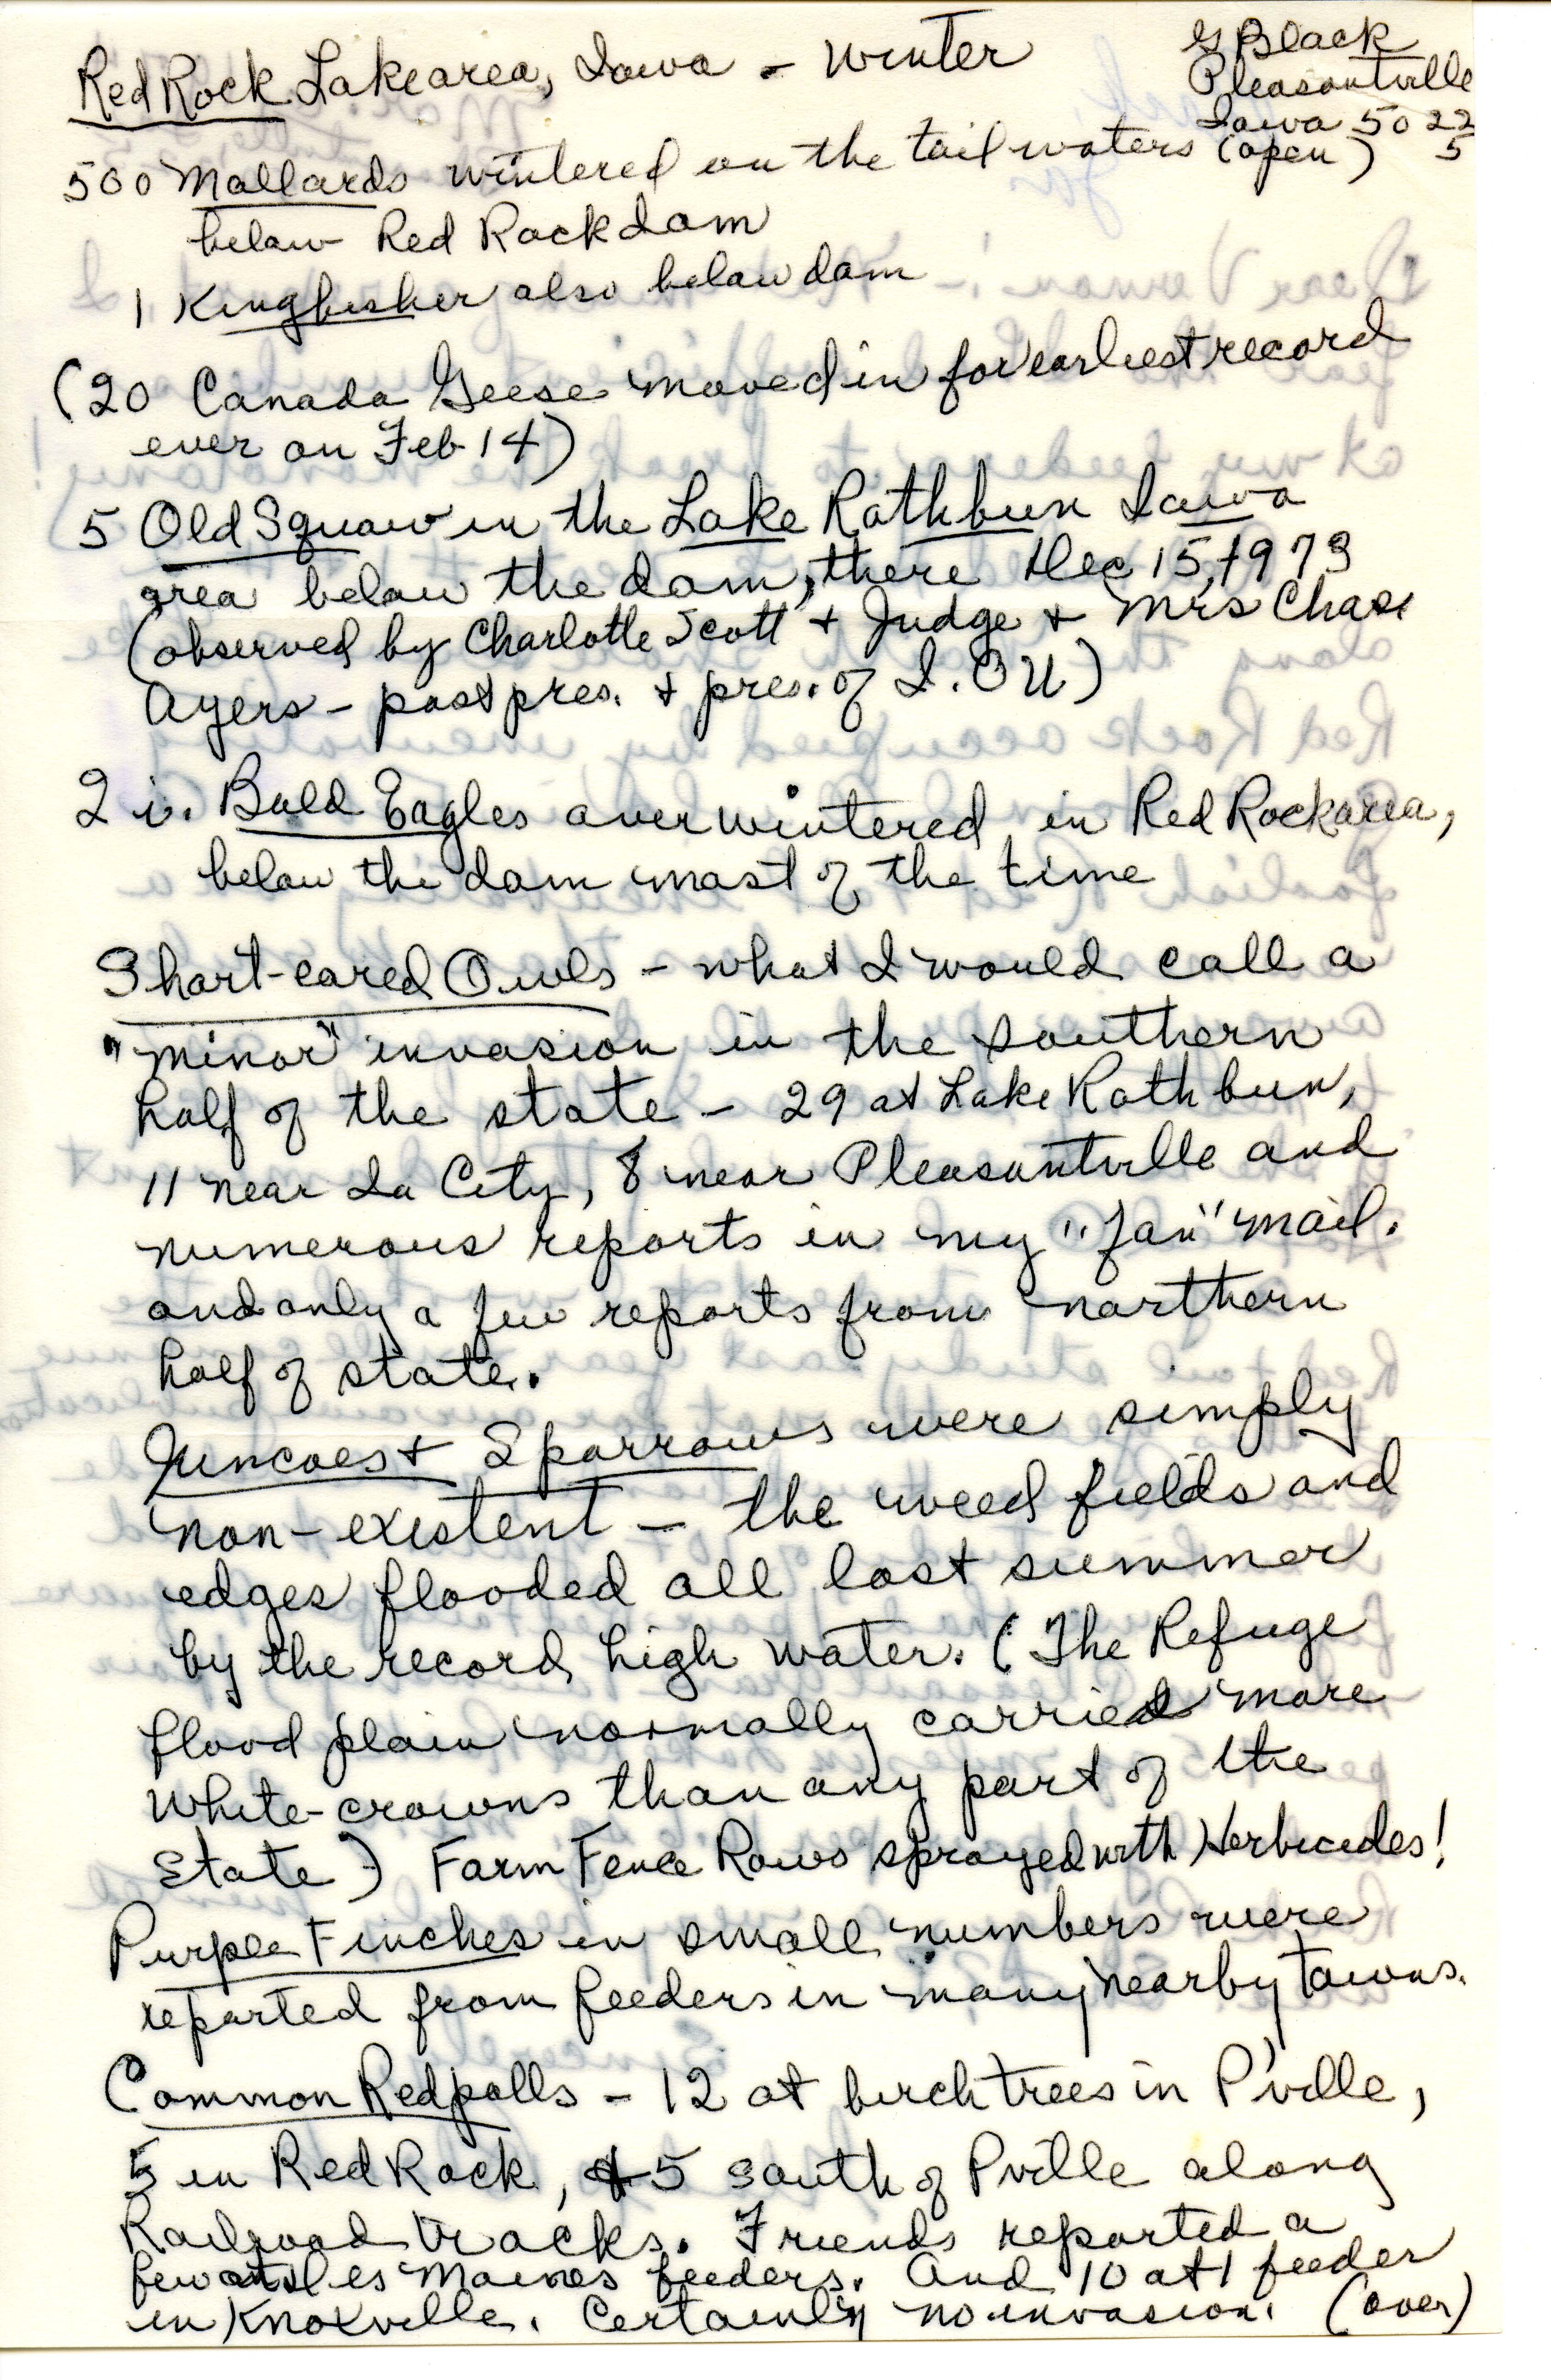 Gladys Black letter and report to Vernon M. Kleen regarding winter Red Rock Lake area bird sightings, March 6, 1974